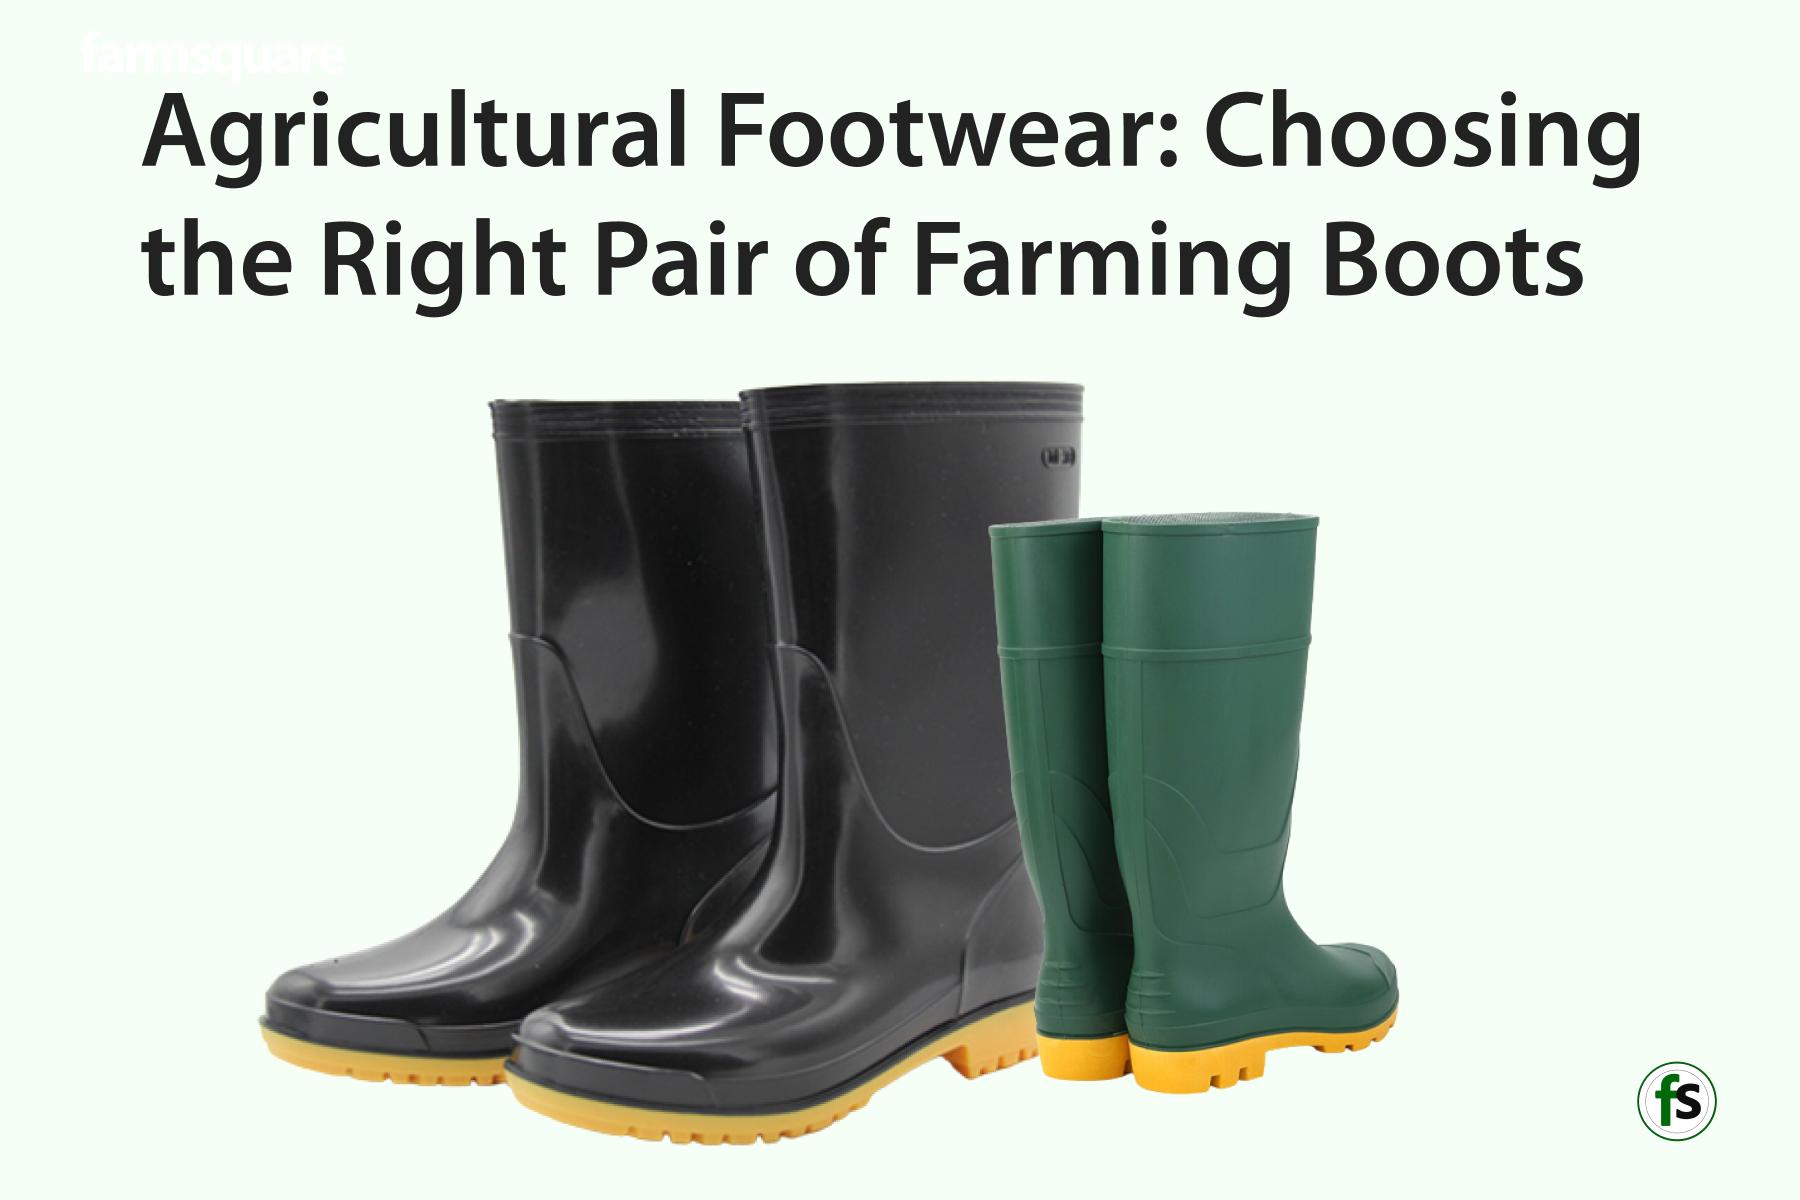 Agricultural Footwear: Choosing the Right Pair of Farming Boots